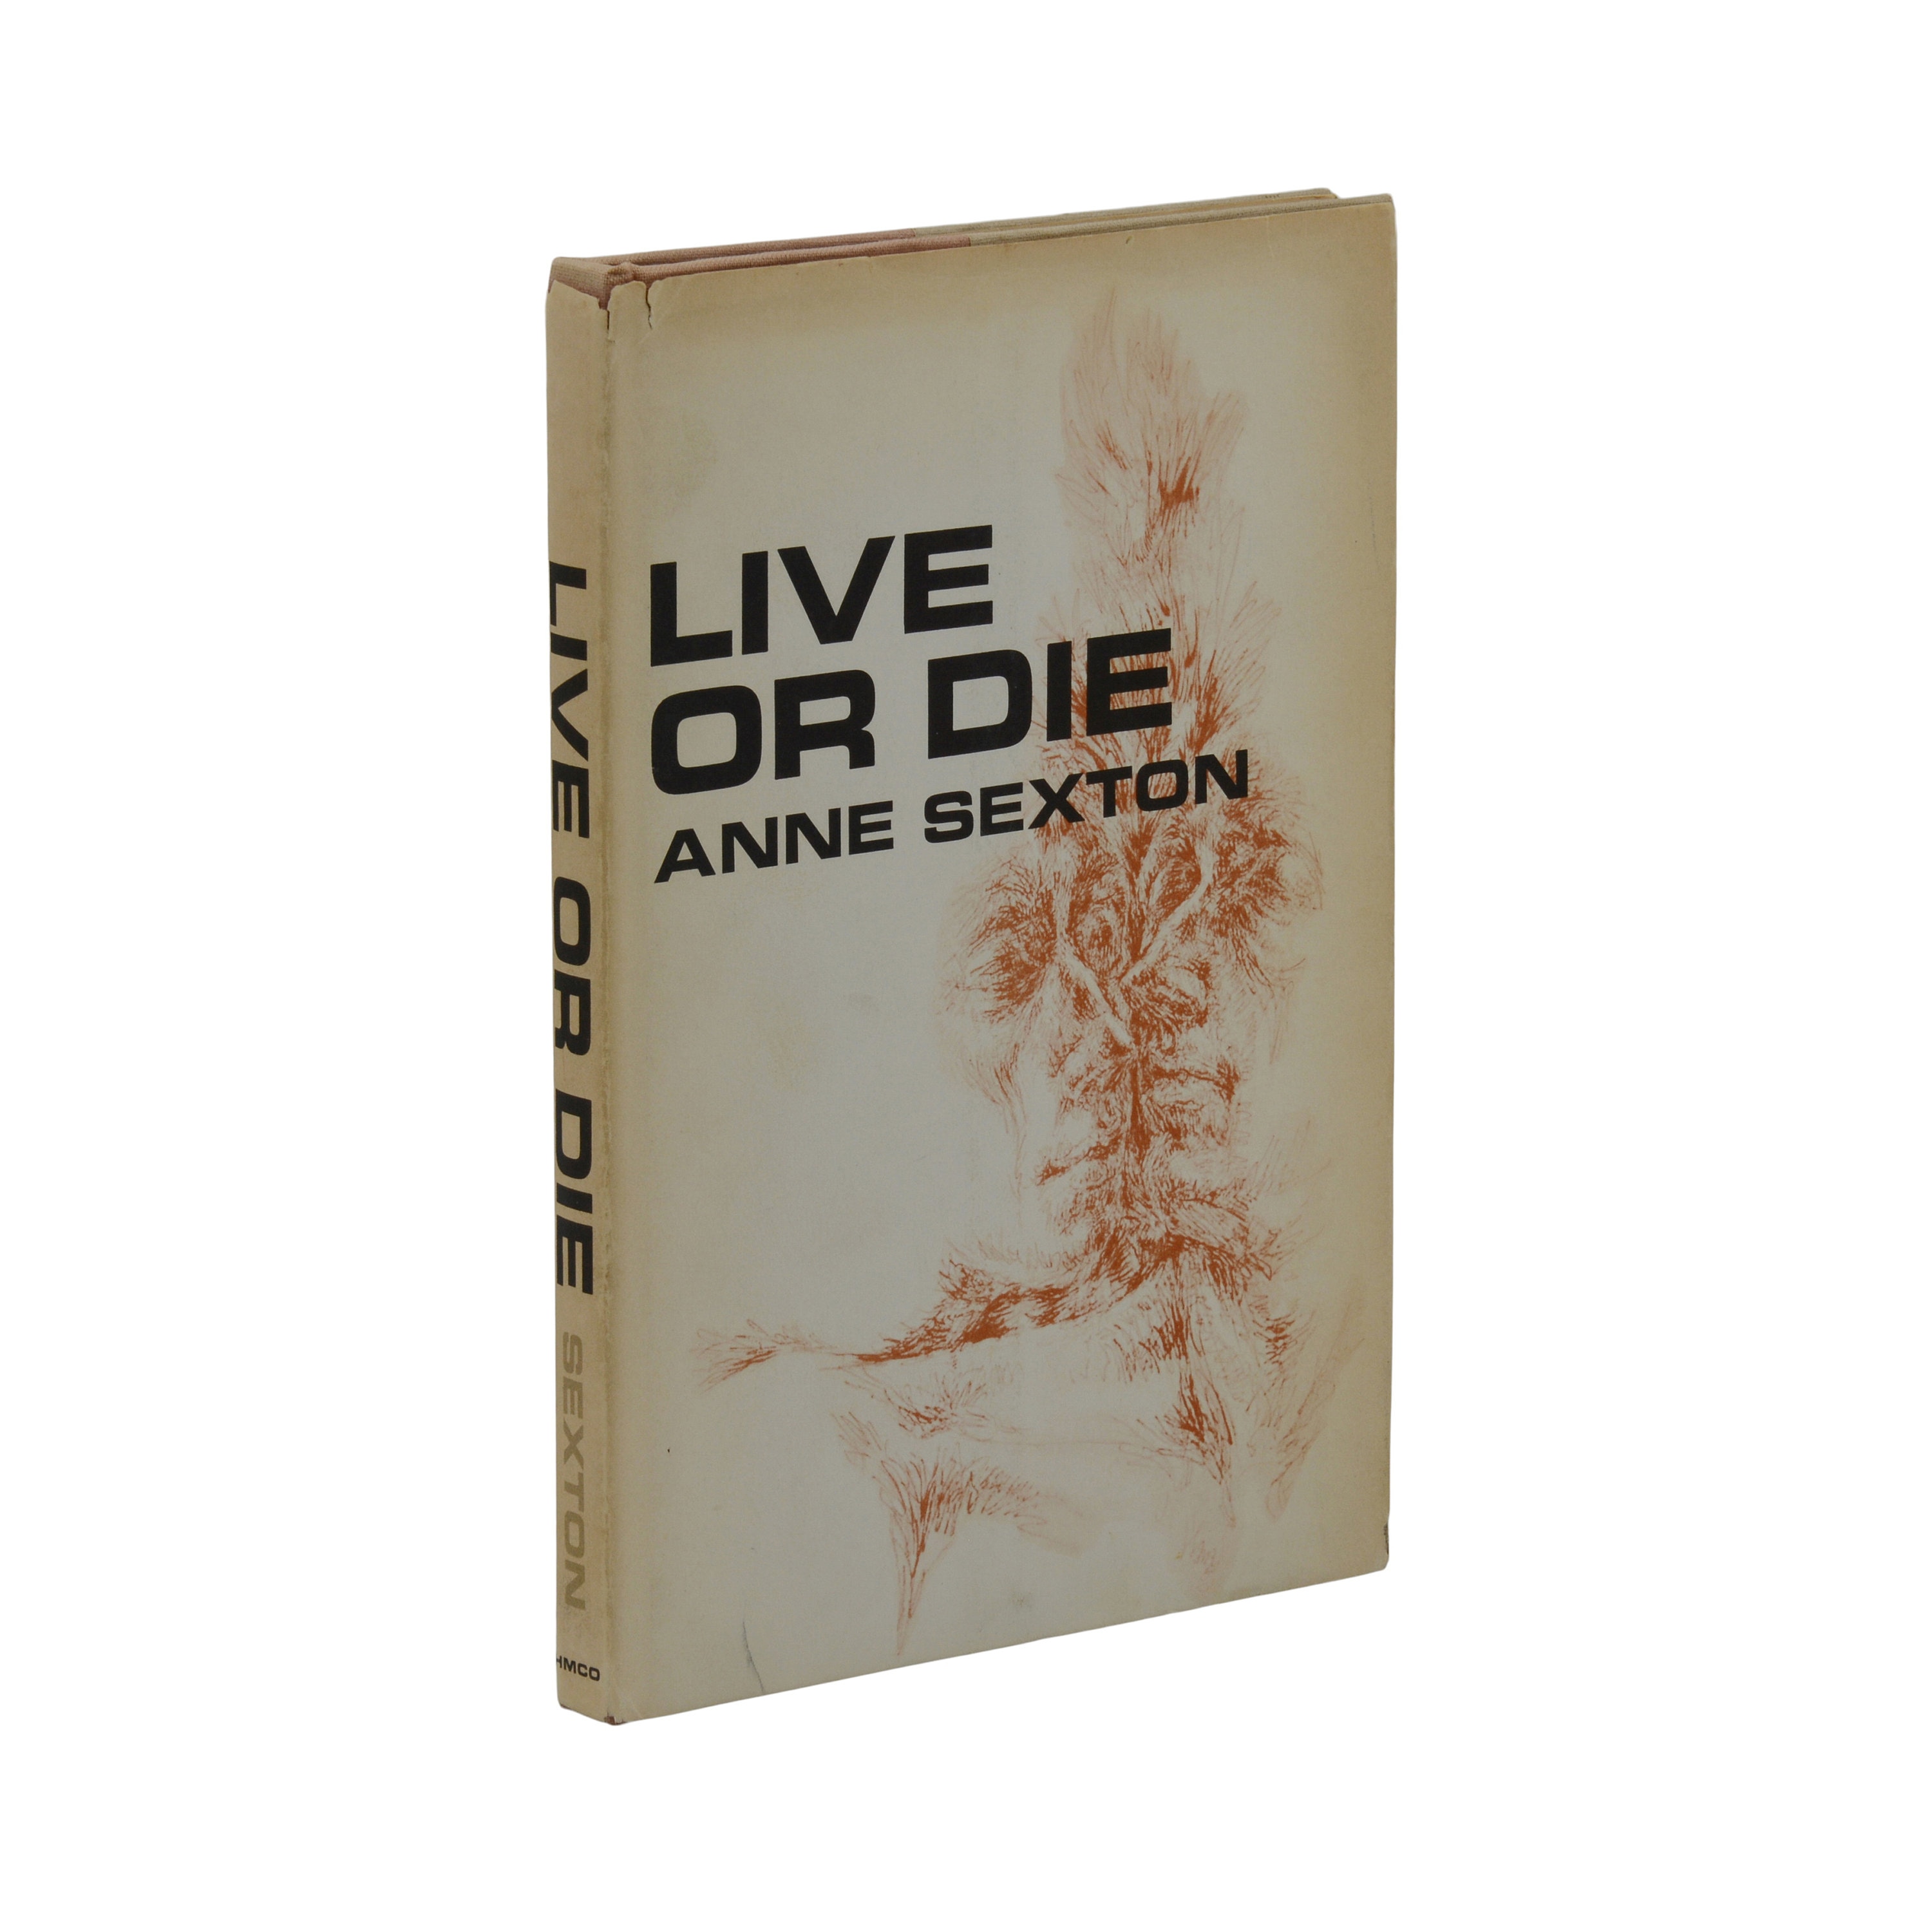 Live or Die ANNE SEXTON First Edition 1st Printing 1966